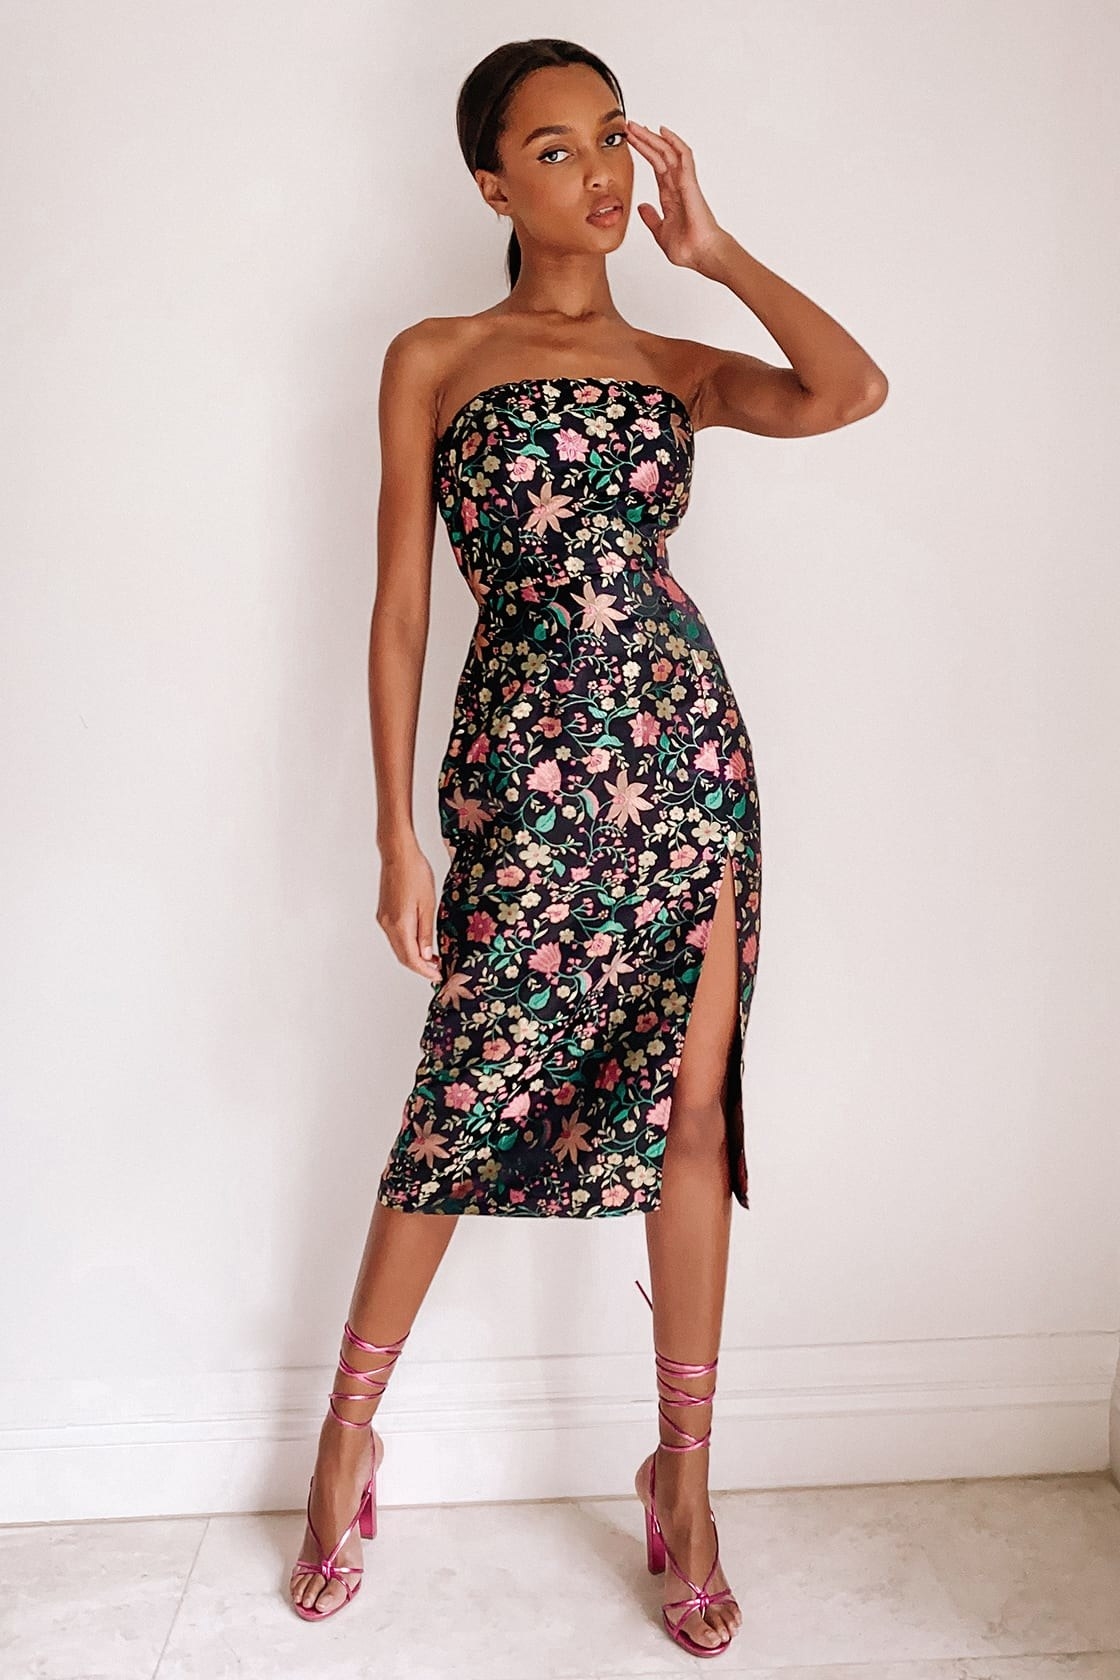 model in black strapless midi dress in a floral jacquard fabric with a slit